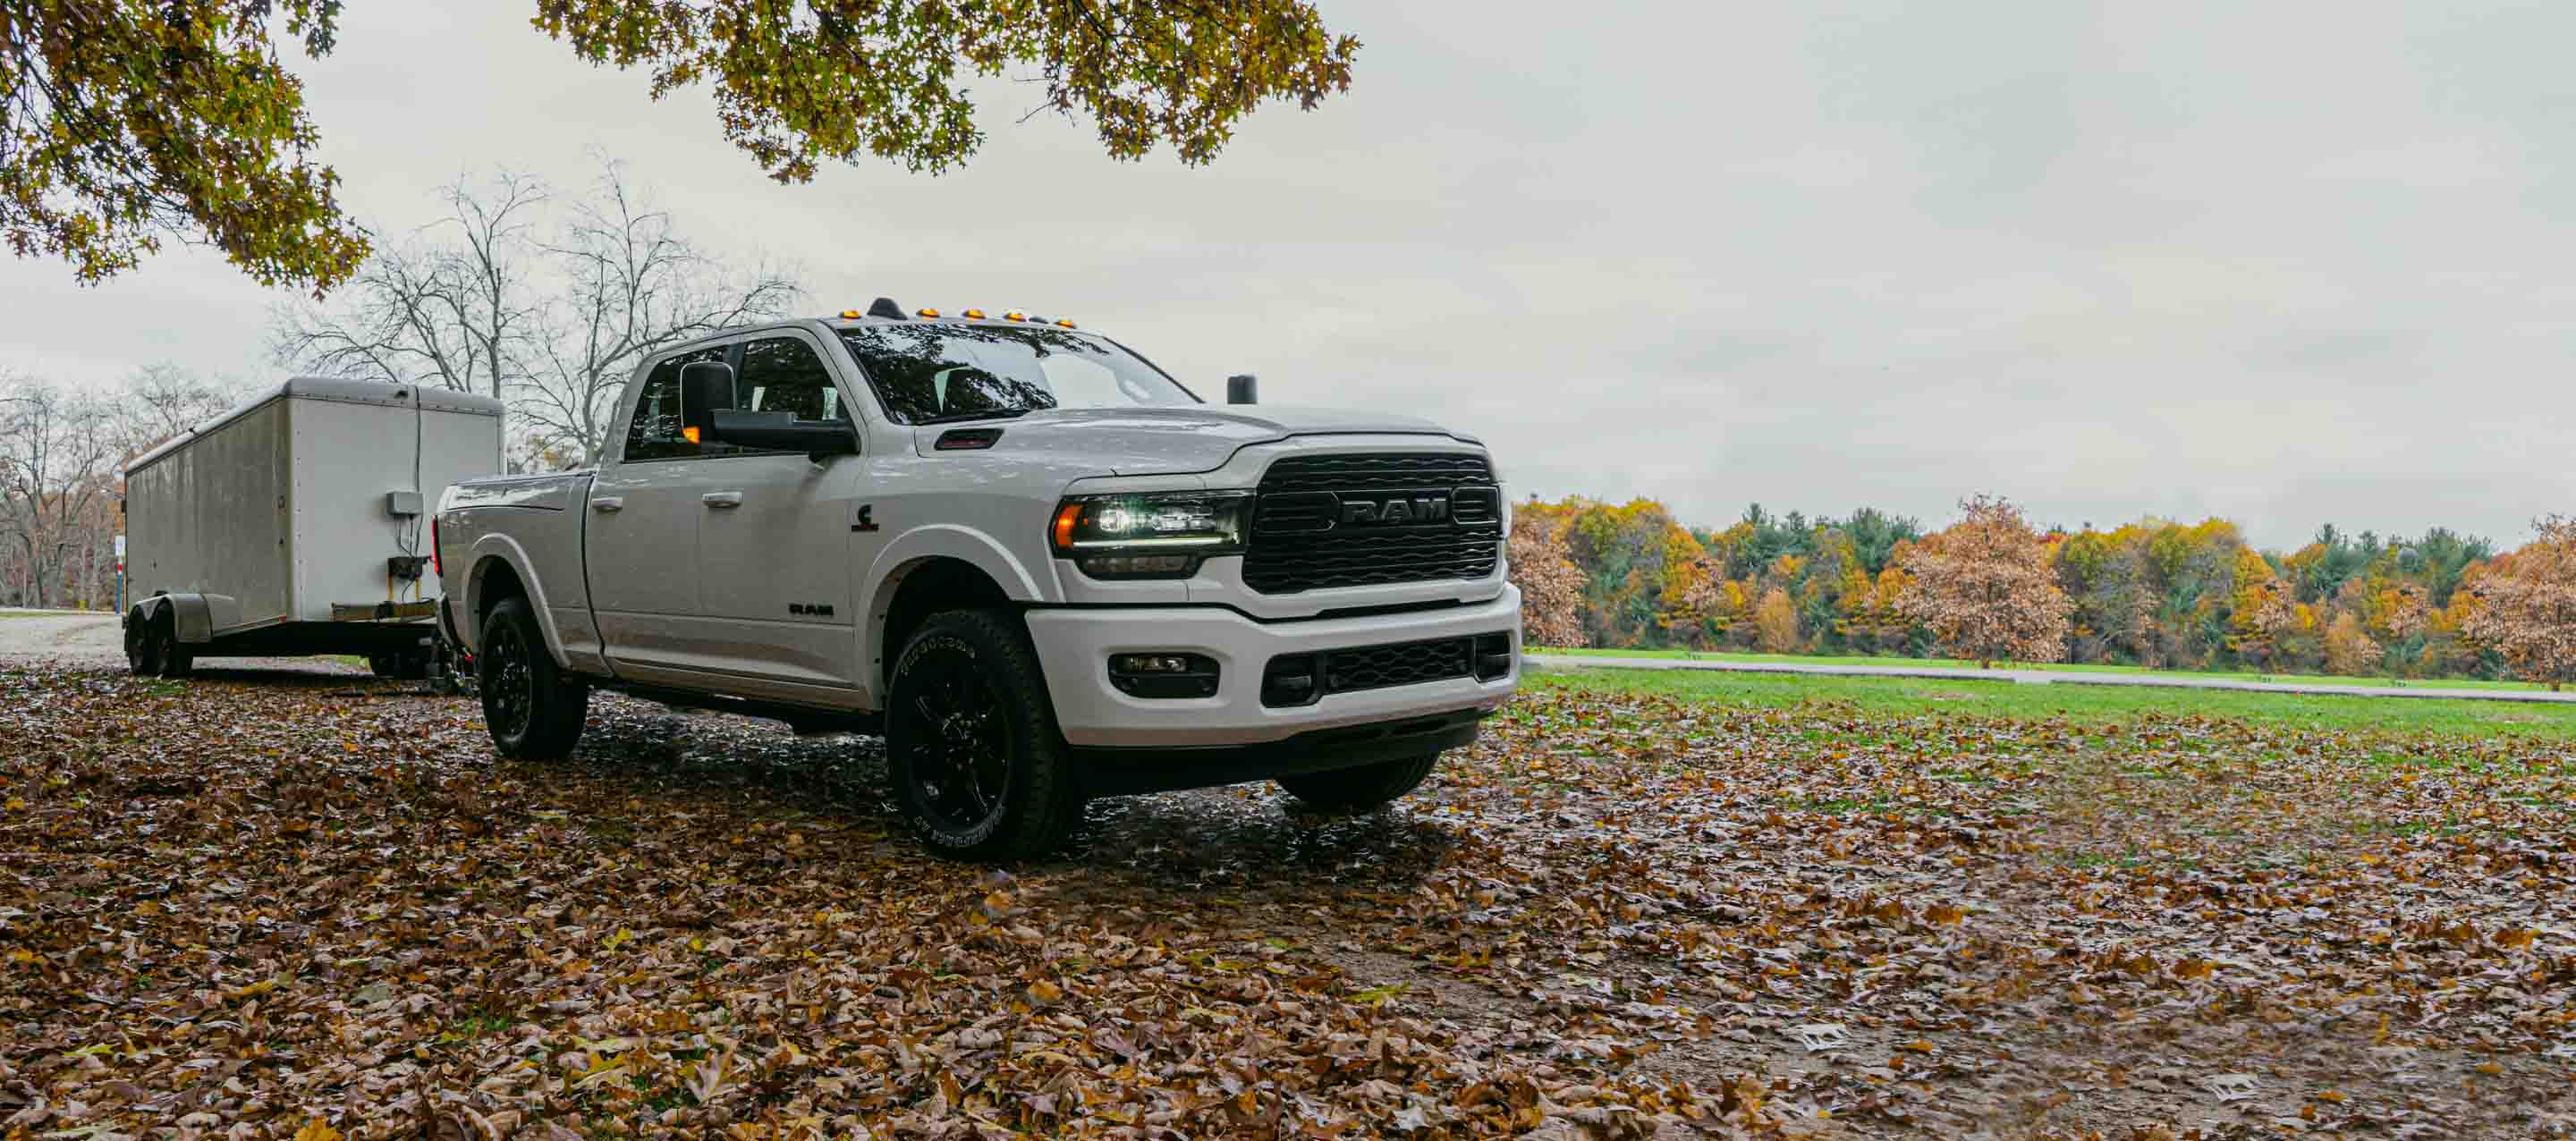 A 2022 Ram 2500 Limited Crew Cab towing a utility trailer, being driven on a road covered in autumn leaves.